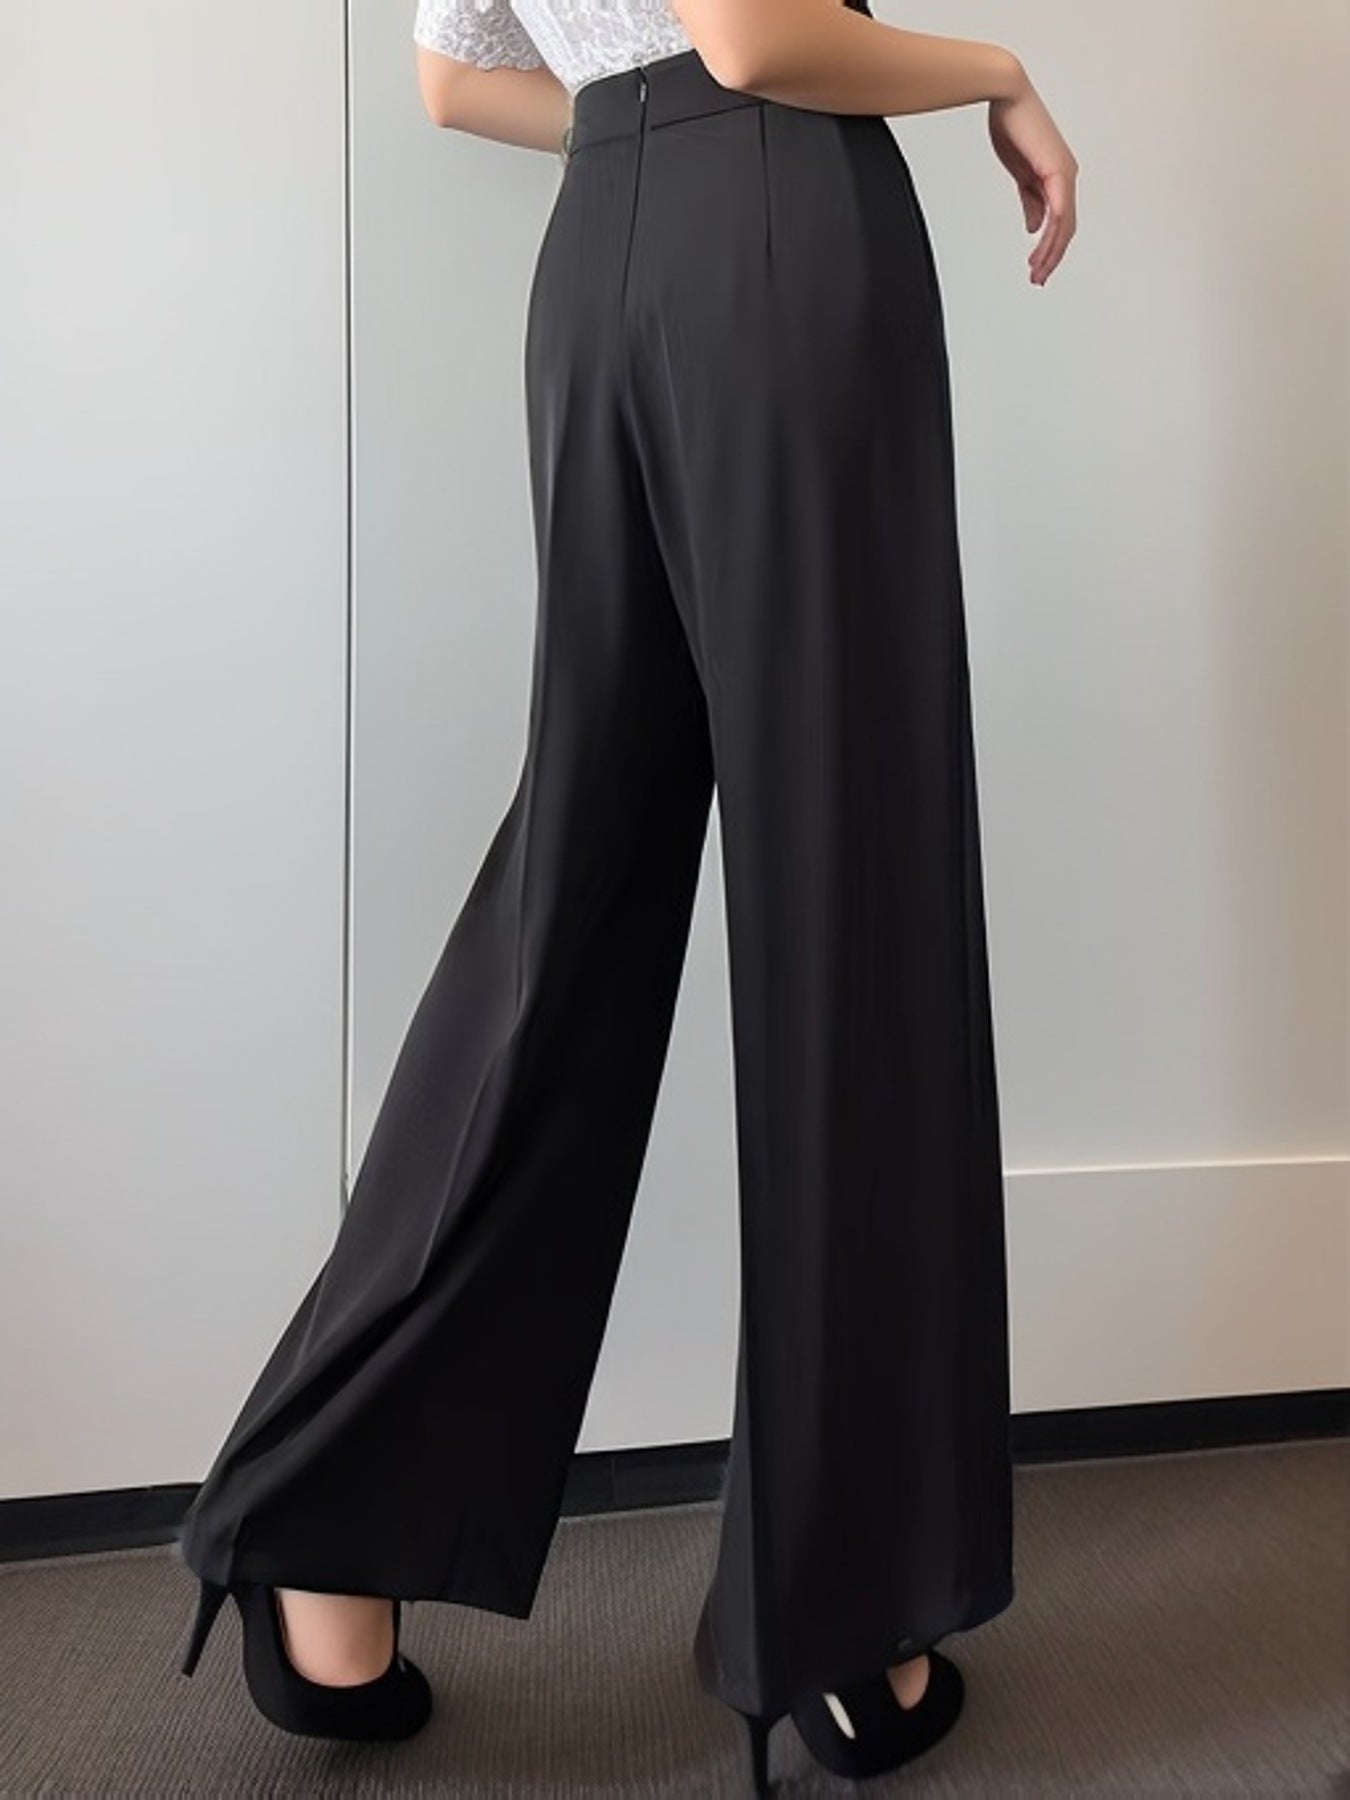 Solid Color High Waist Drooping Casual Wide Leg Pants